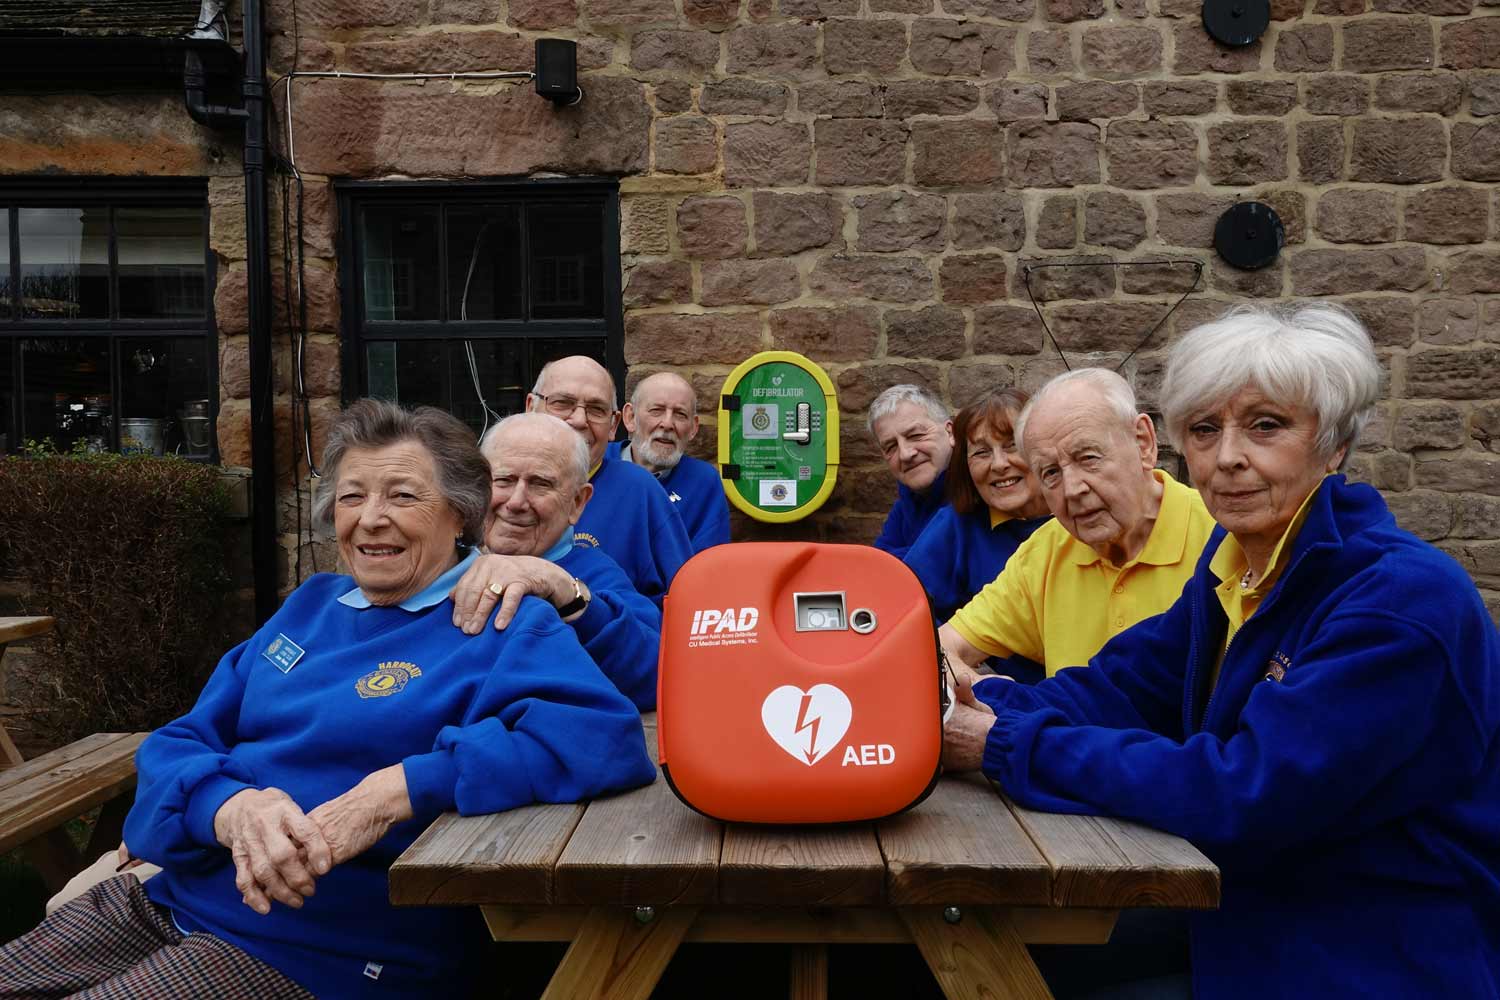 New community defibrillator and CPR training at the Knox in Harrogate HArrogate Lions